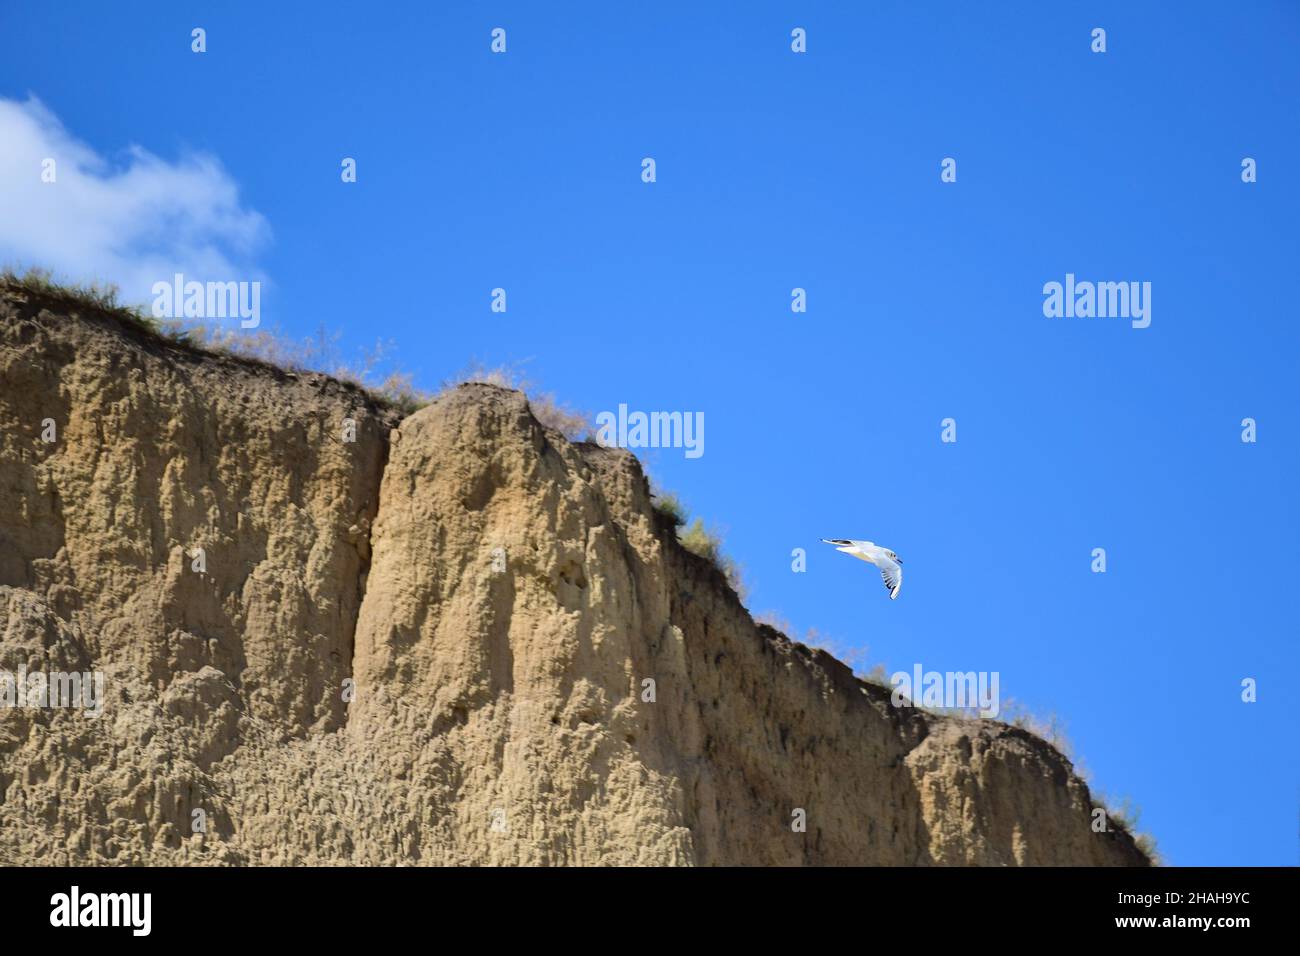 A seagull flies near a sandy sheer cliff against the backdrop of a bright blue sky. Blurred background Stock Photo